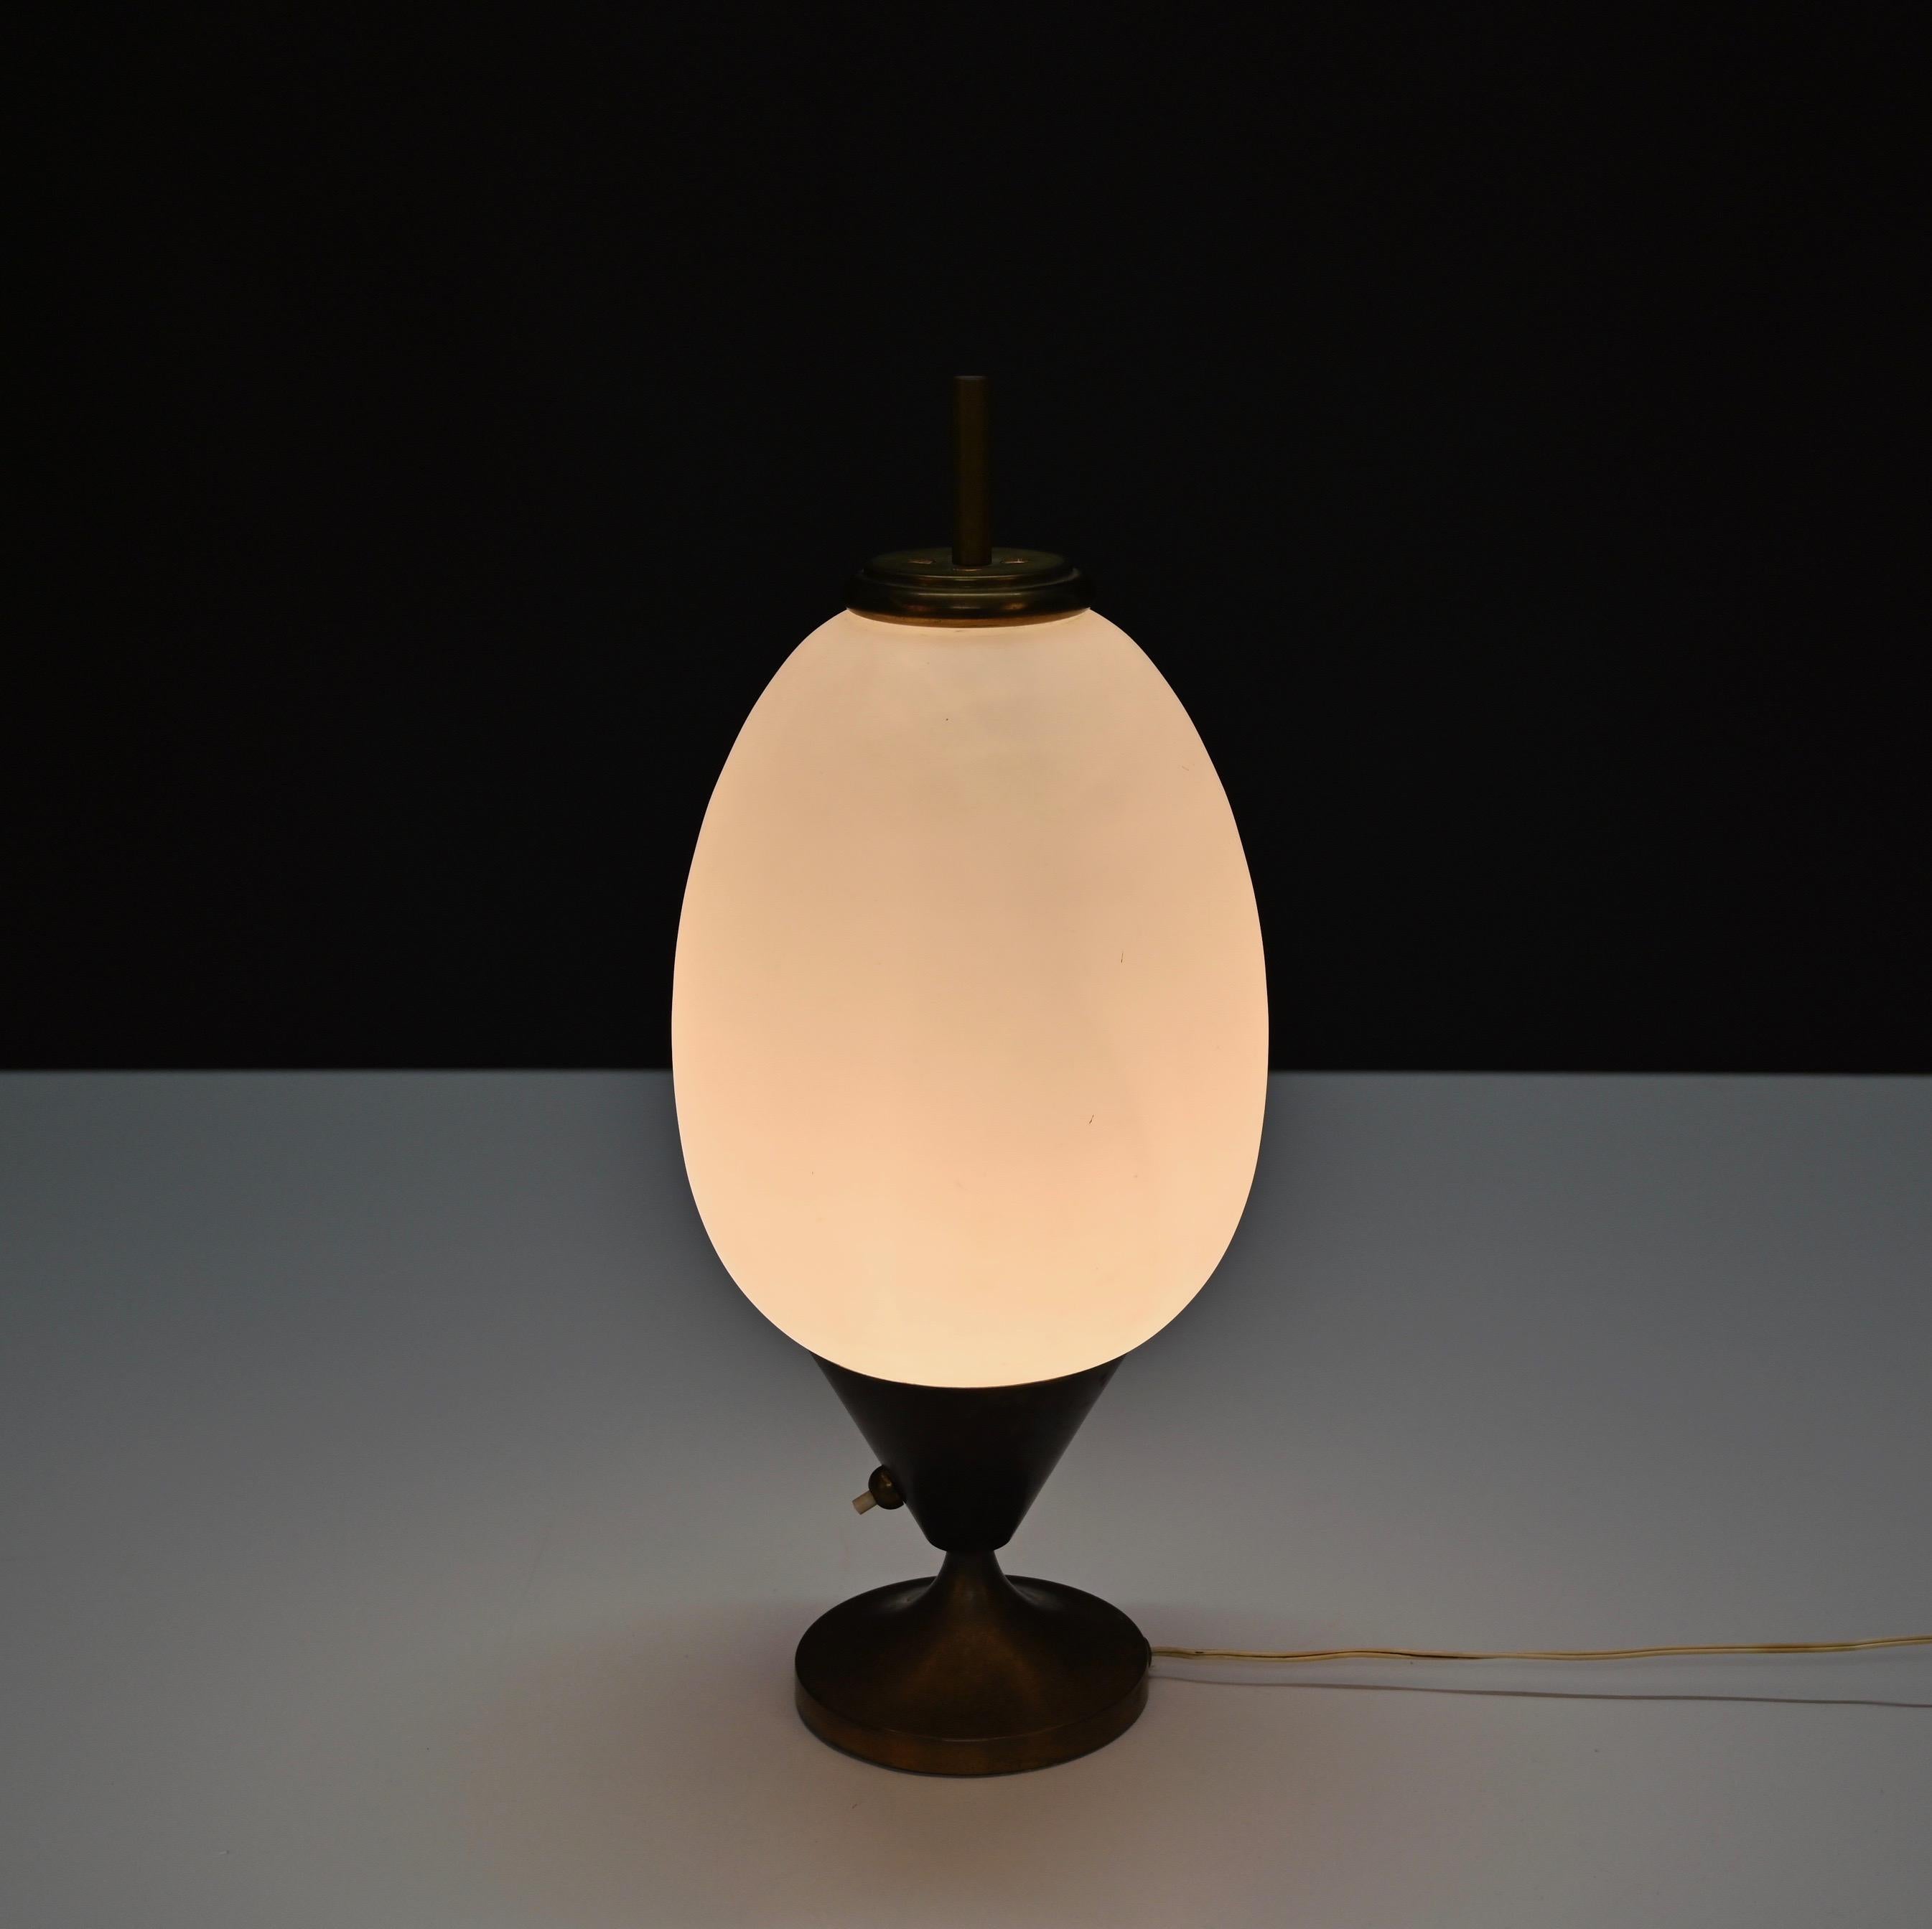 20th Century Mid-Century Modern Brass and Opaline Glass Egg-Shaped Italian Table Lamp, 1950s For Sale